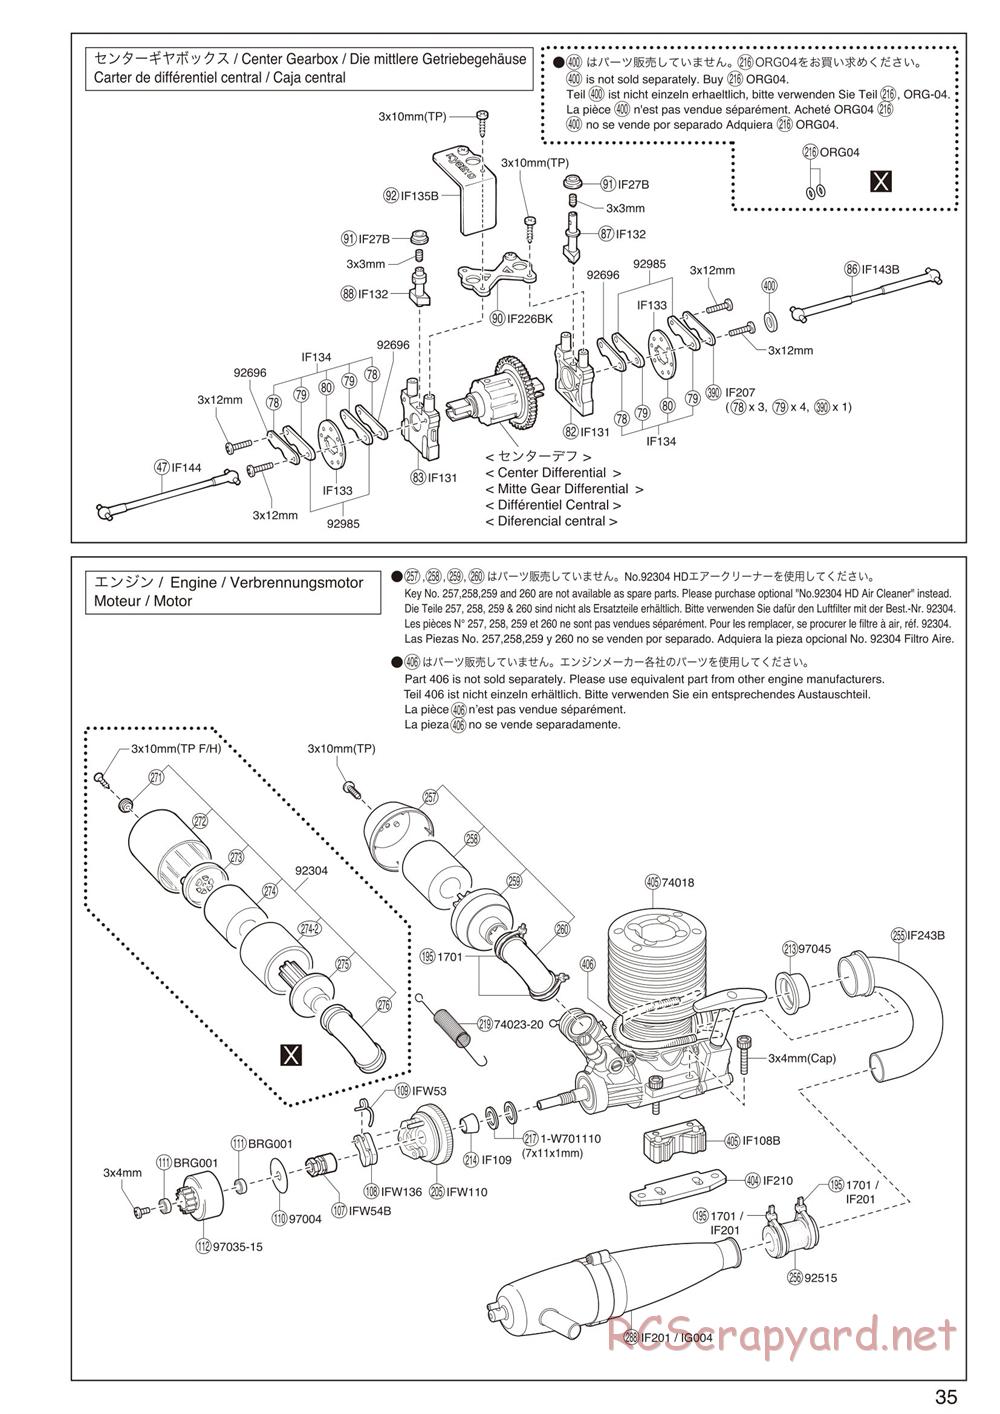 Kyosho - Inferno Neo 2.0 - Exploded Views - Page 4